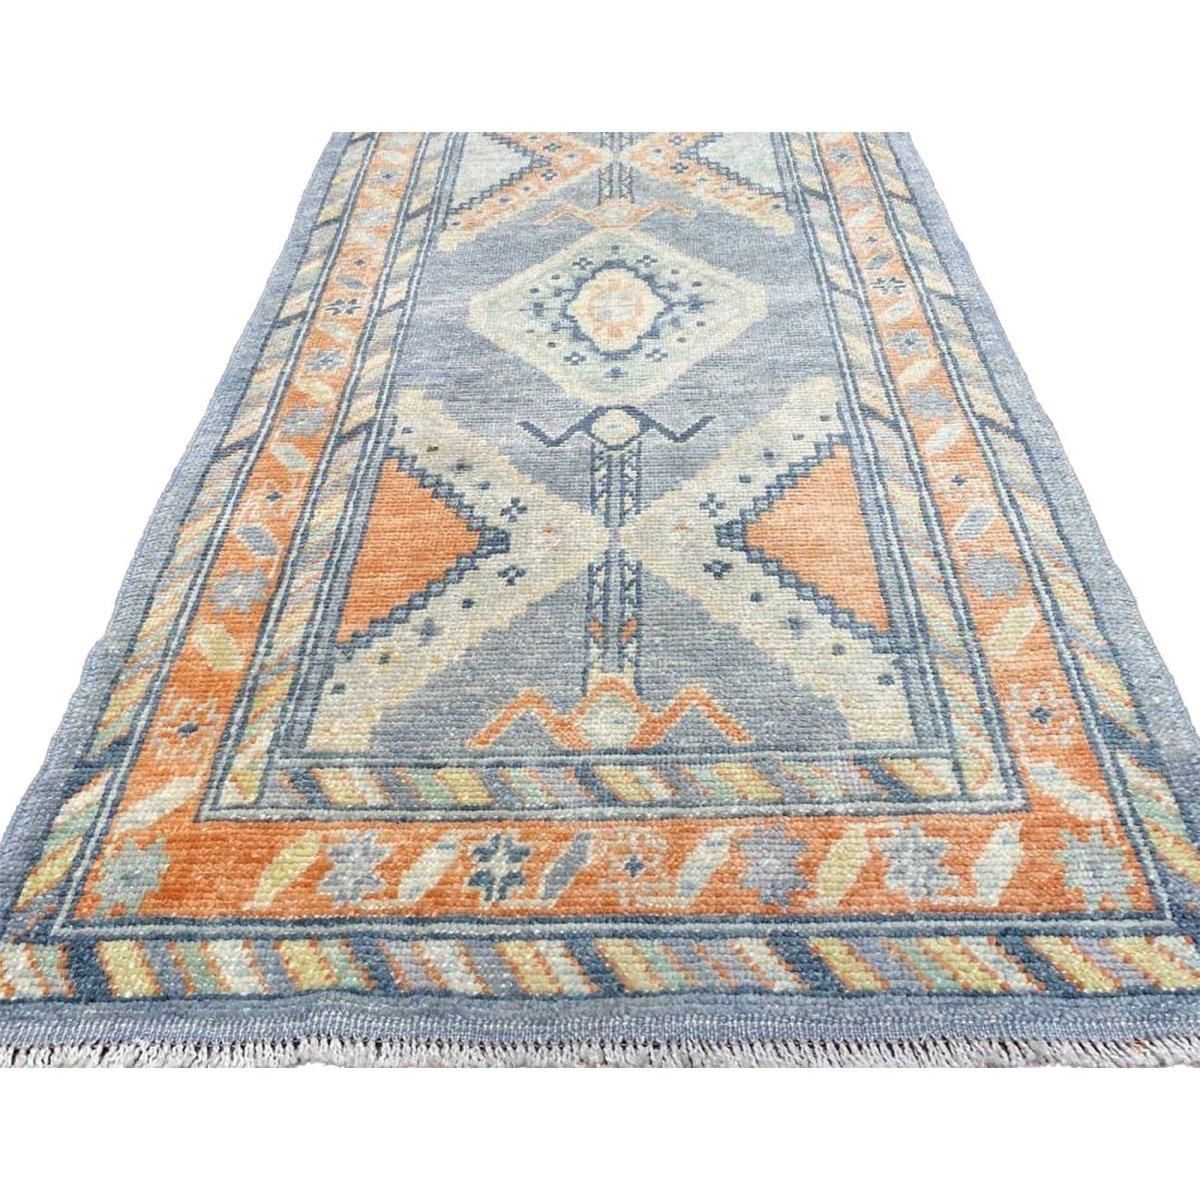 Turkish Oushak Runner Rug In Good Condition For Sale In Dallas, TX